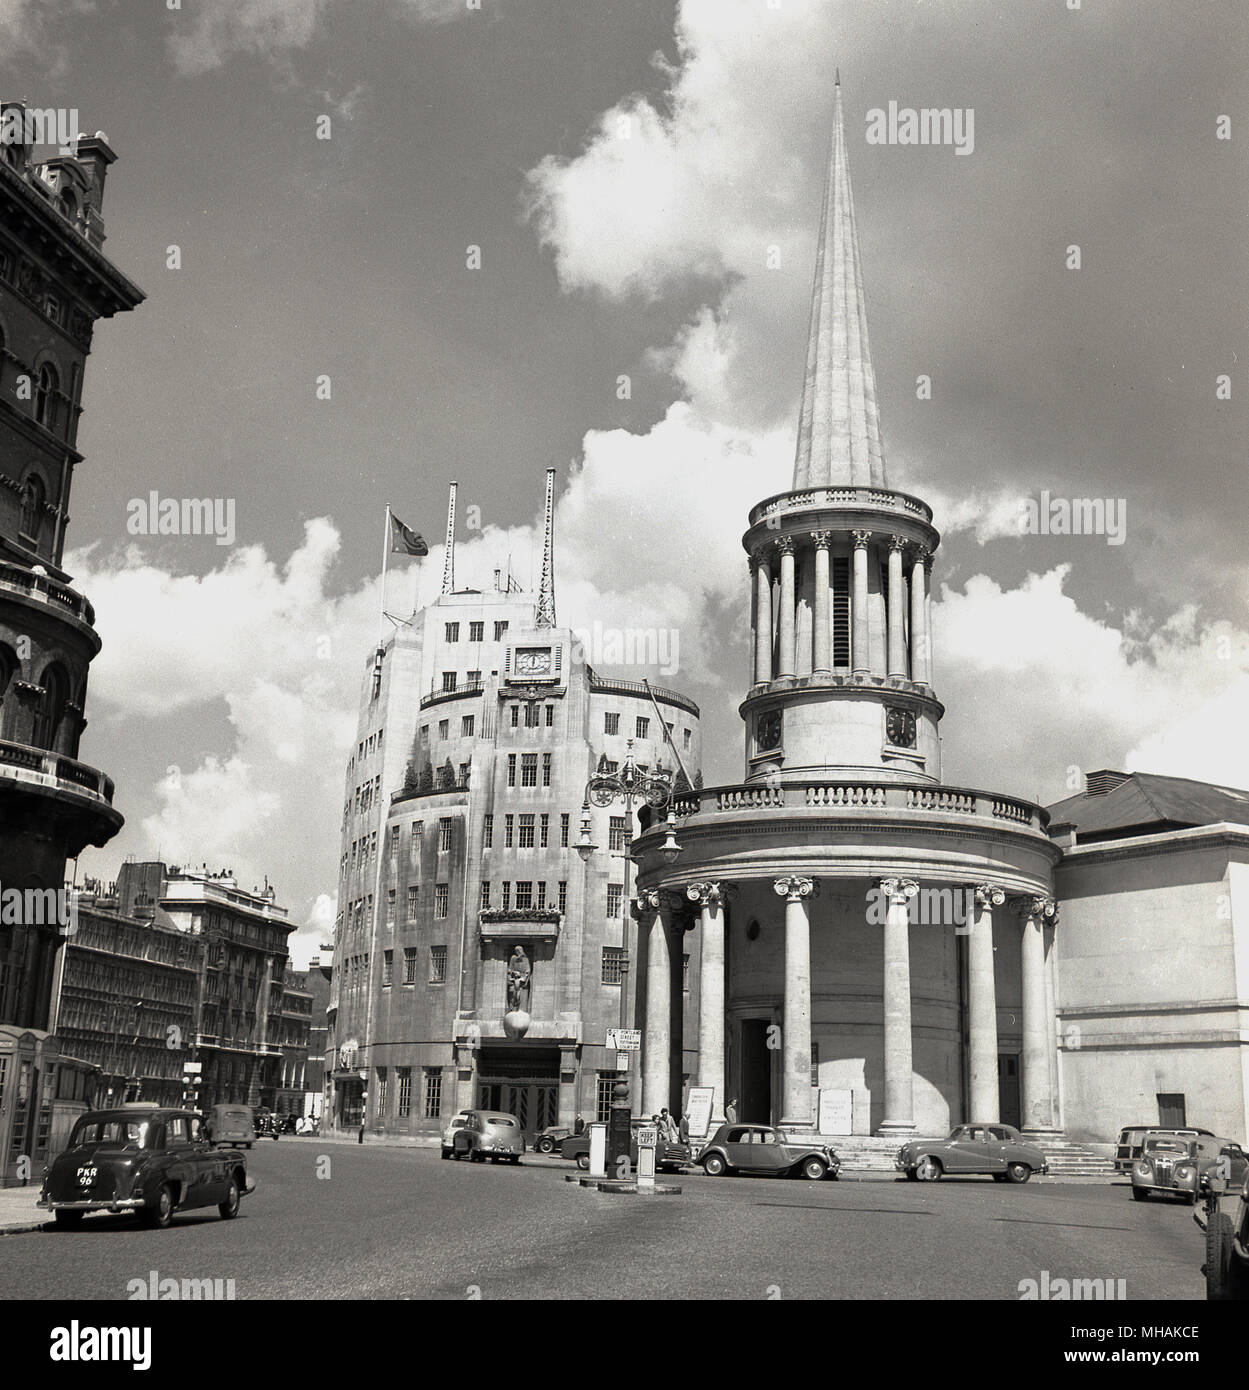 1950s, historical, exterior view of All Souls Church at Langham Place, london, with Broadcasting House, the central london home of the BBC, behind it. The church with its tall elegant spire was designed in regency style by John Nash. Stock Photo